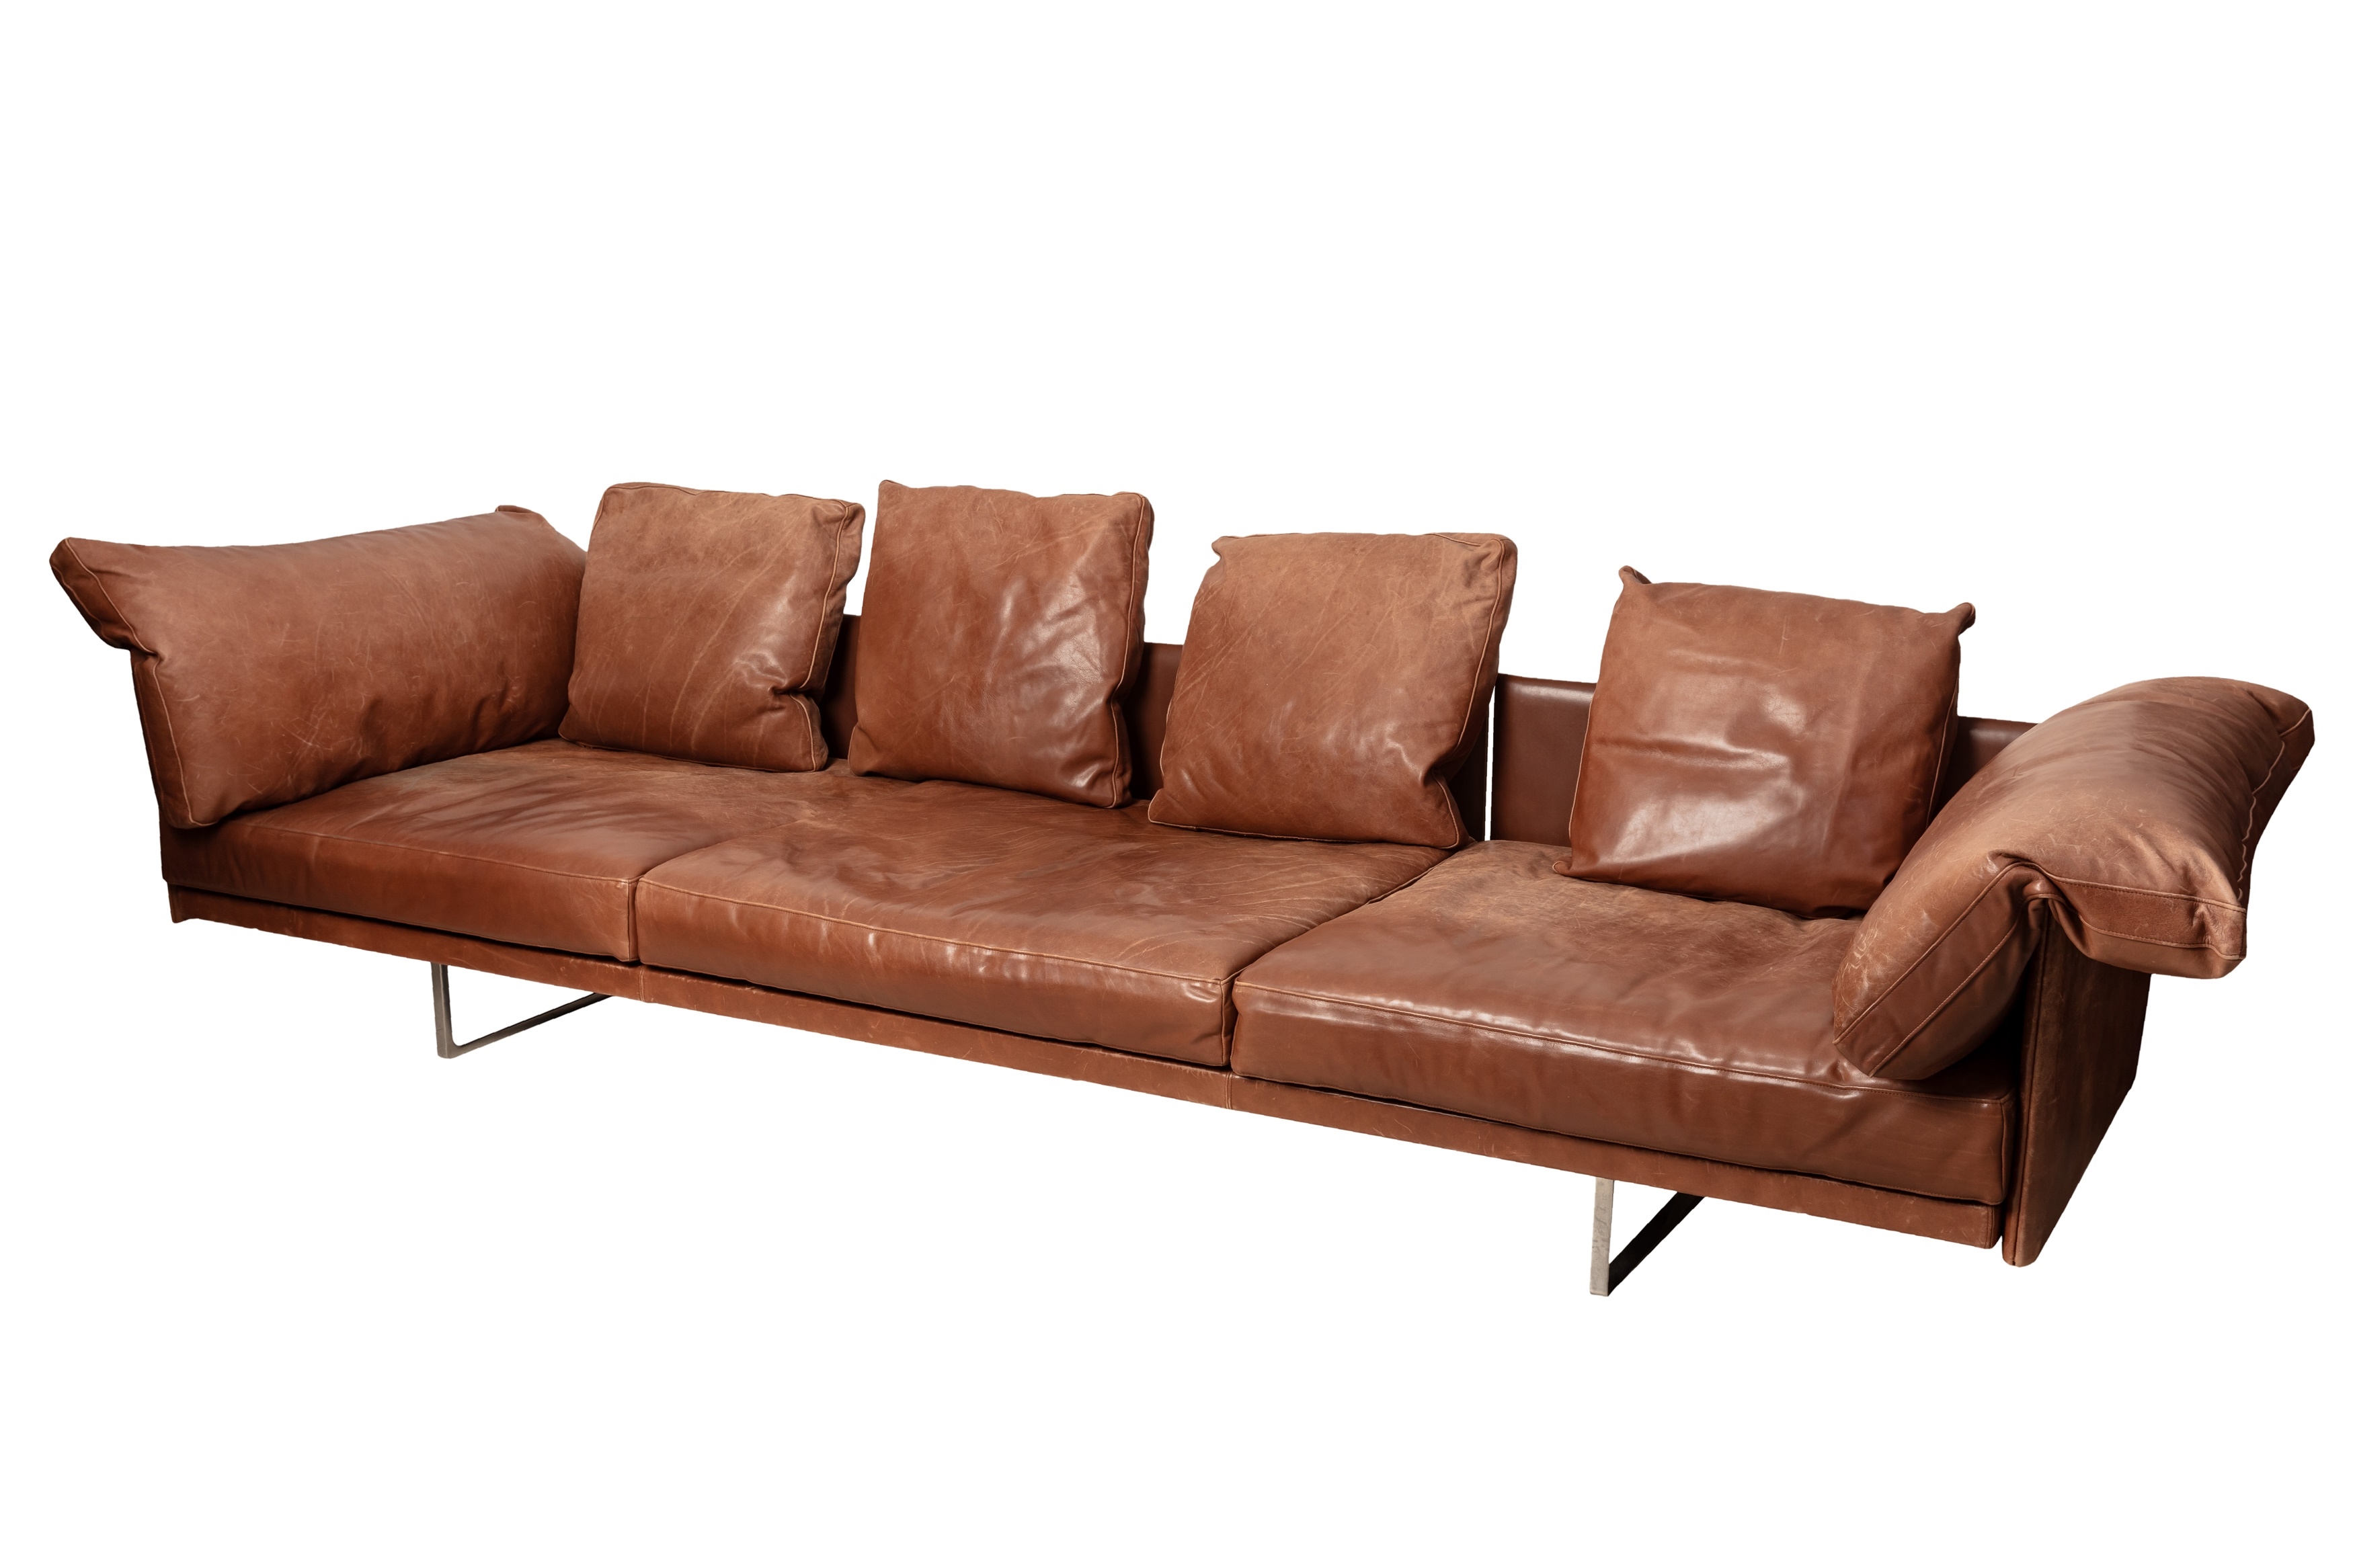 upholstered in brown leather - Piero Lissoni